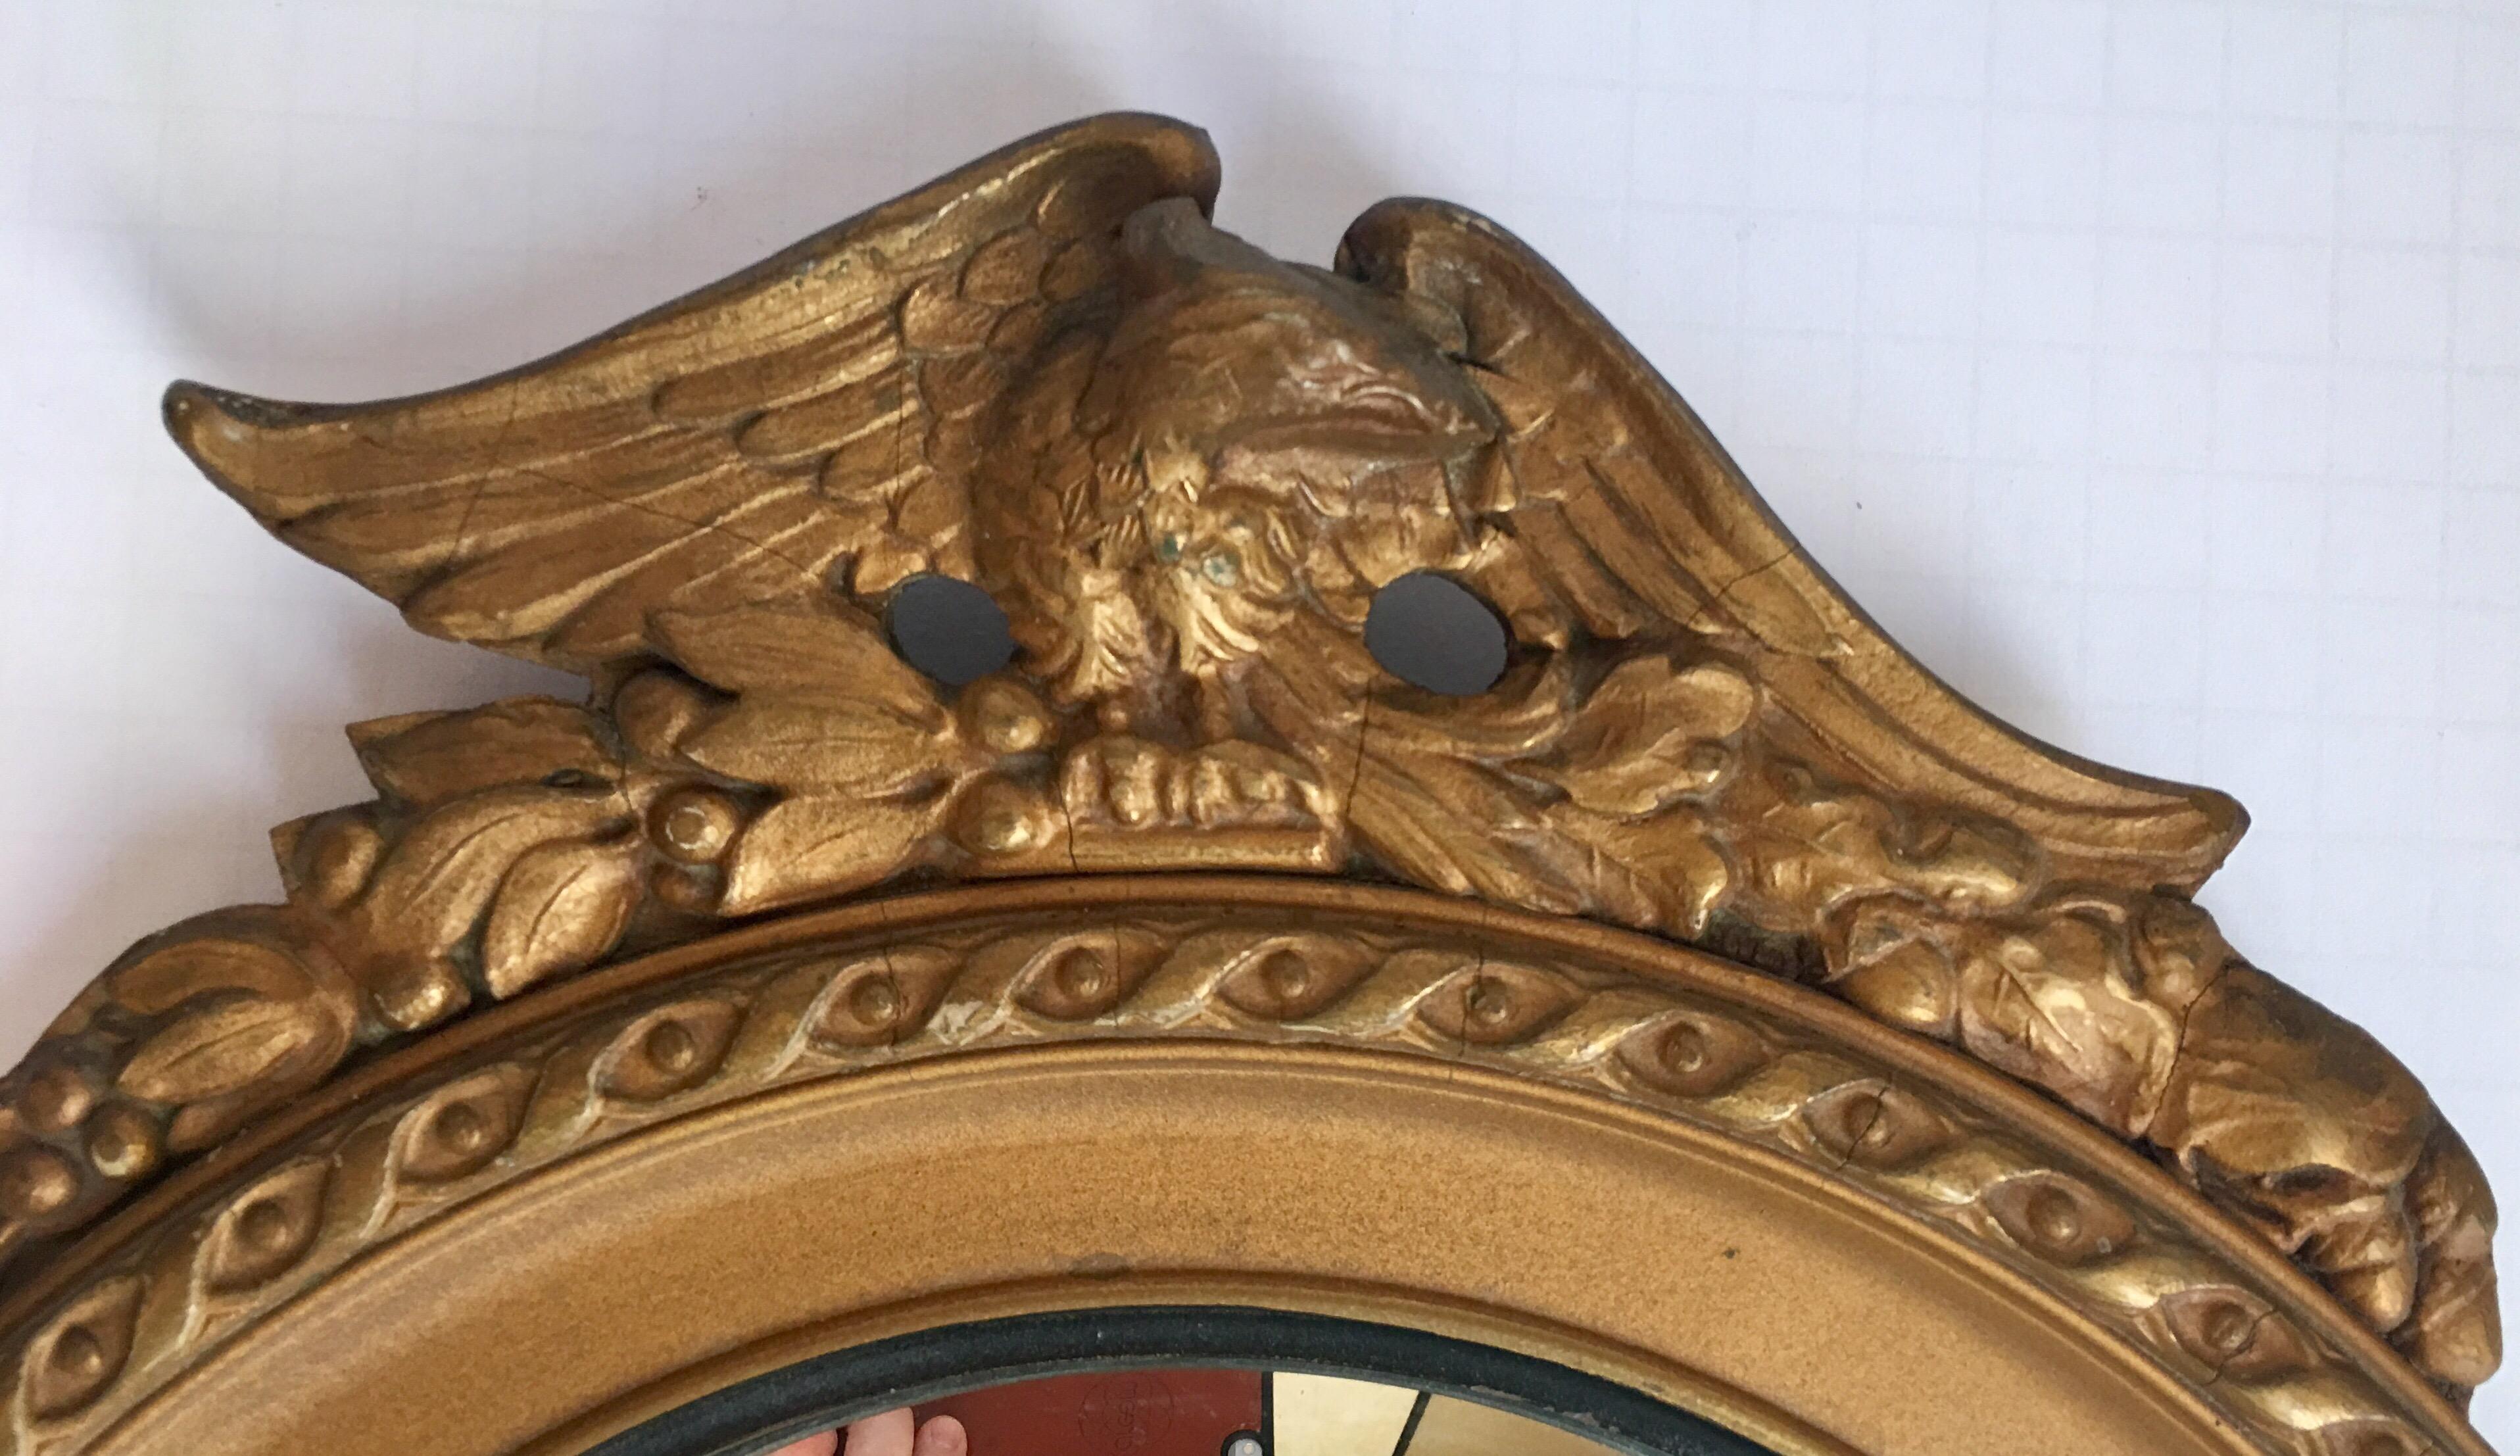 Midcentury round convex giltwood wall mirror featuring a carved eagle with acanthus foliate decoration. This sculptural Regency style convex fish eye eagle mirror is a nice size to incorporate into an art grouping.